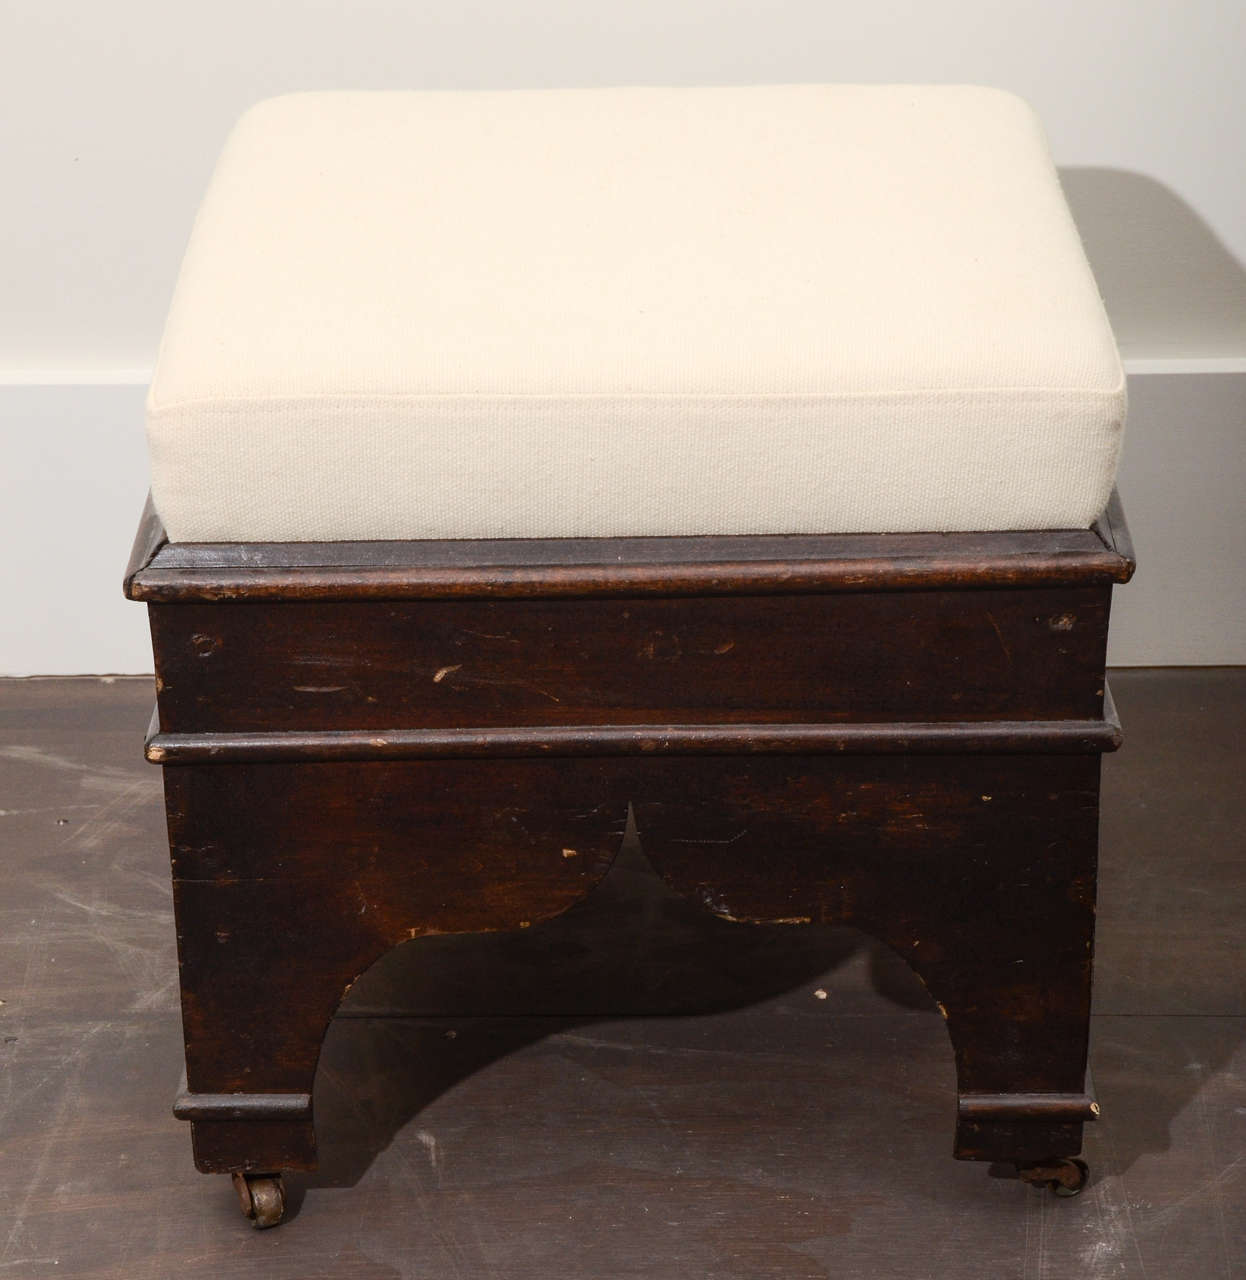 Vintage hand-carved wooden stool with cream upholstery, United States, c. 20th century. 

This petite yet highly charming stool consists of a darkened base with Moorish hand-carved details and cream upholstery. Sits on brass casters.